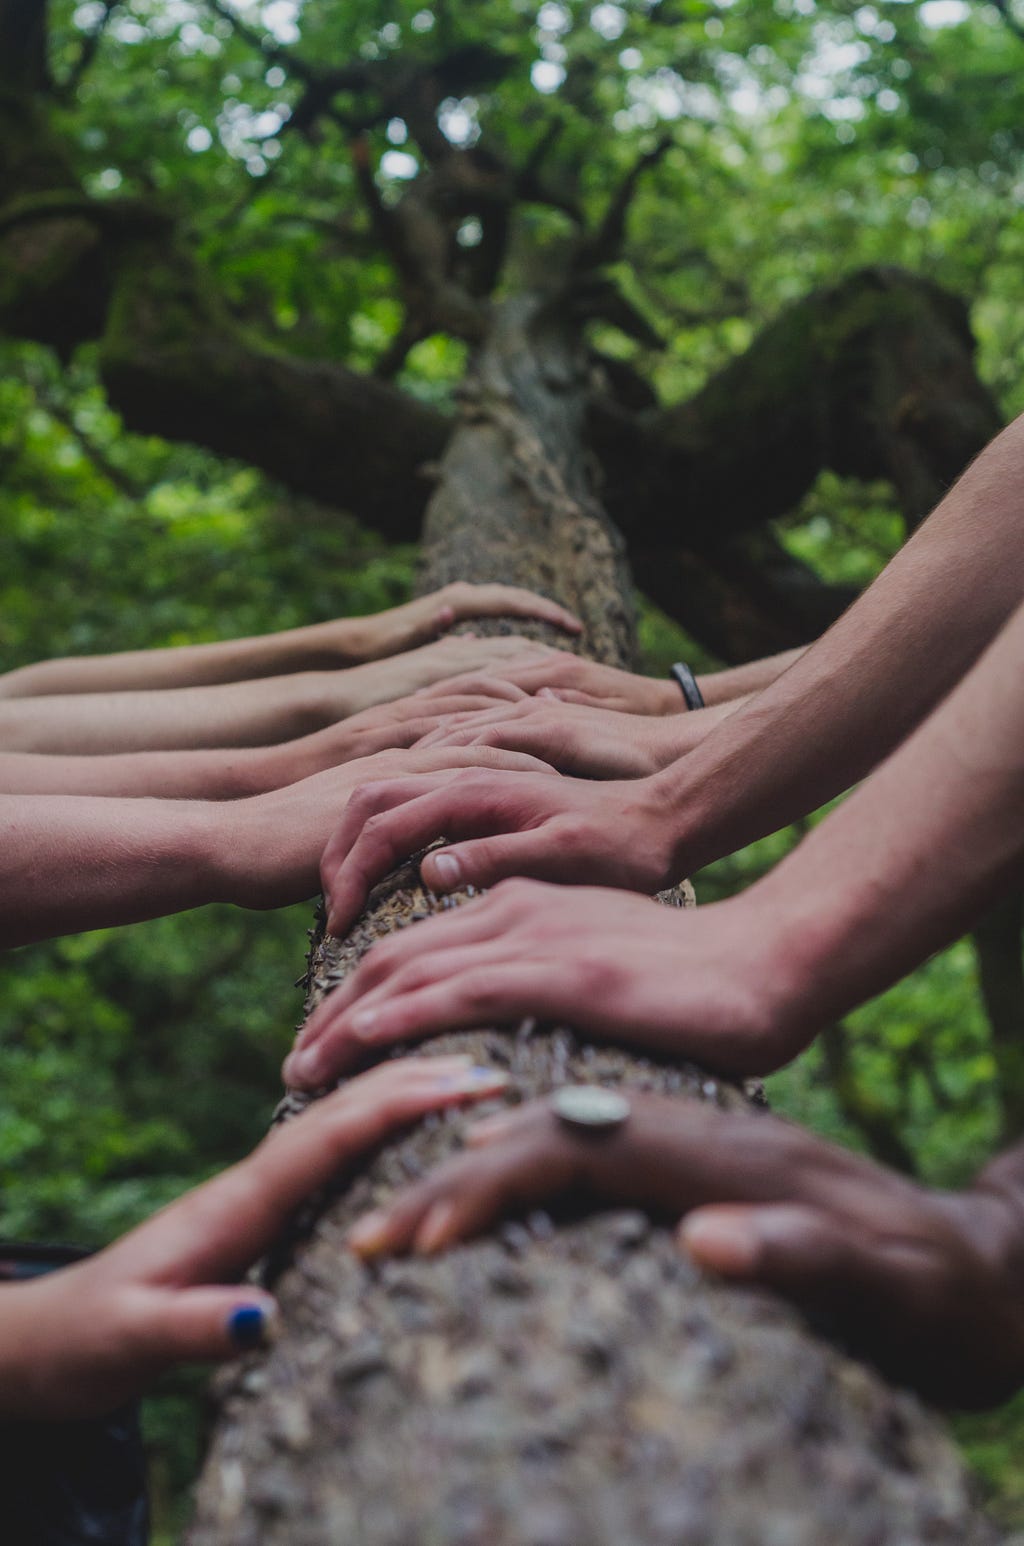 A photograph of multiple people placing their hands next to each other on a tree stump.